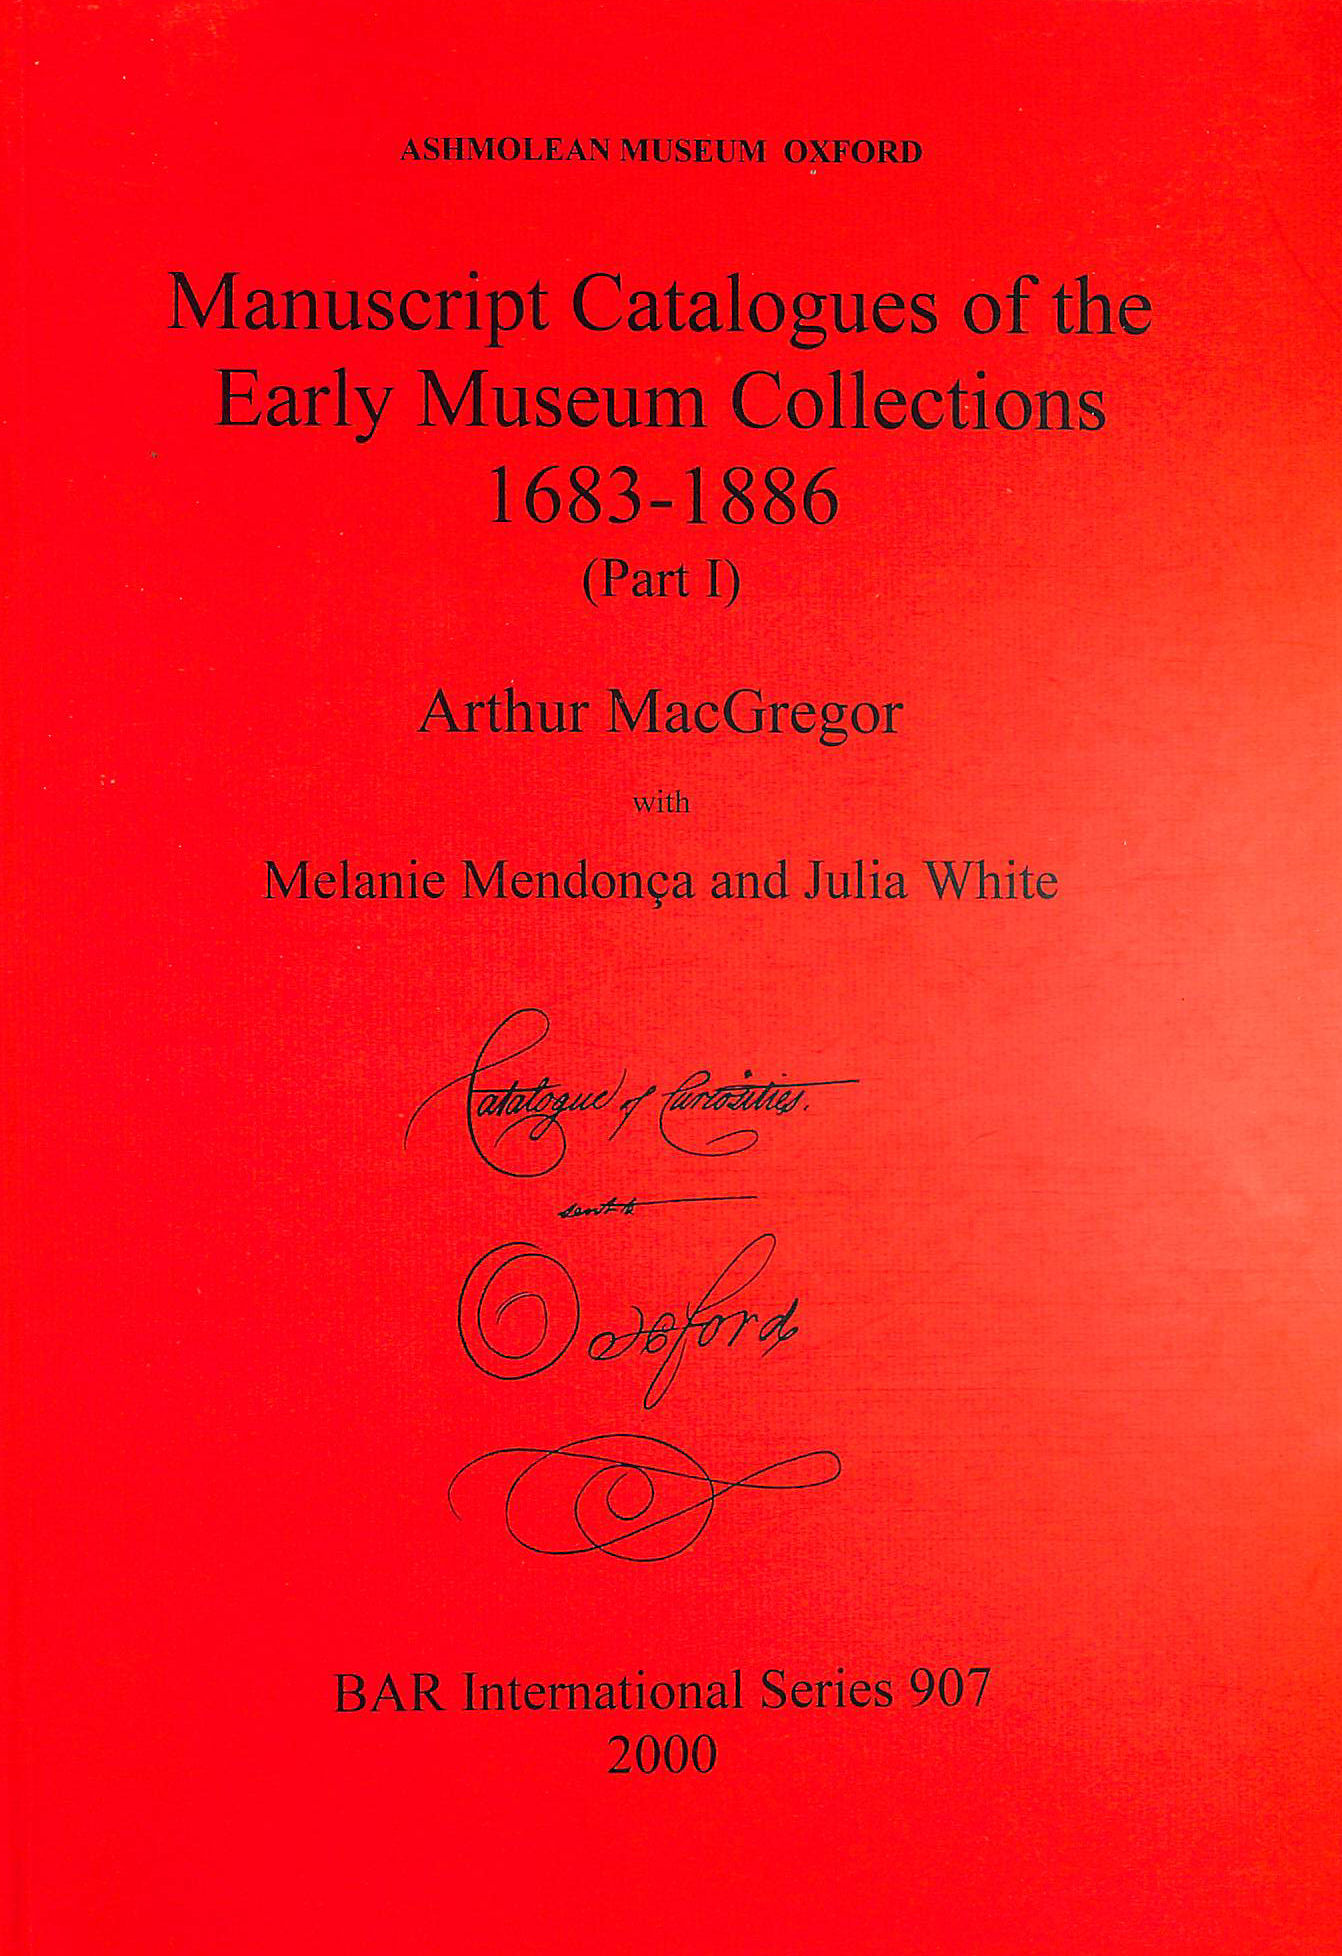 MACGREGOR, ARTHUR; MENDOCA, MELANIE; WHITE, JULIA - Ashmolean Museum - Manuscript Catalogues of the Early Museum Collections 1683-1886 (Part I) (British Archaeological Reports International Series)